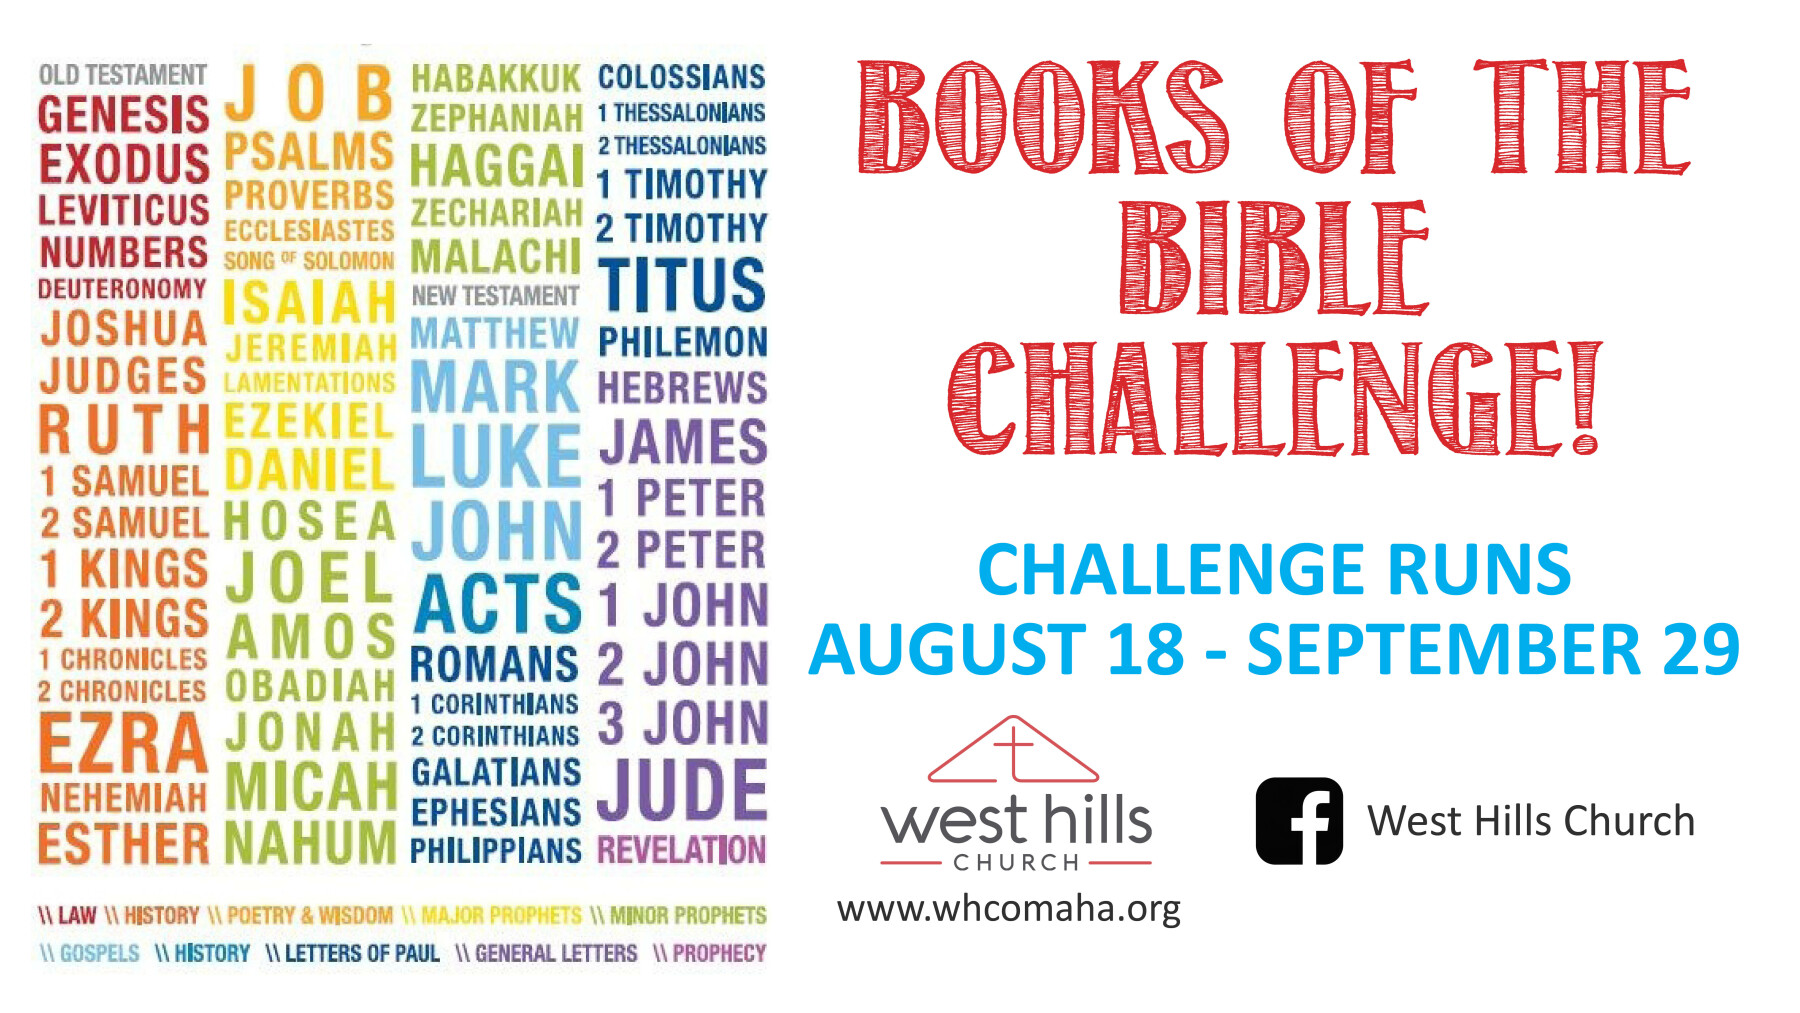 Books of the Bible Challenge